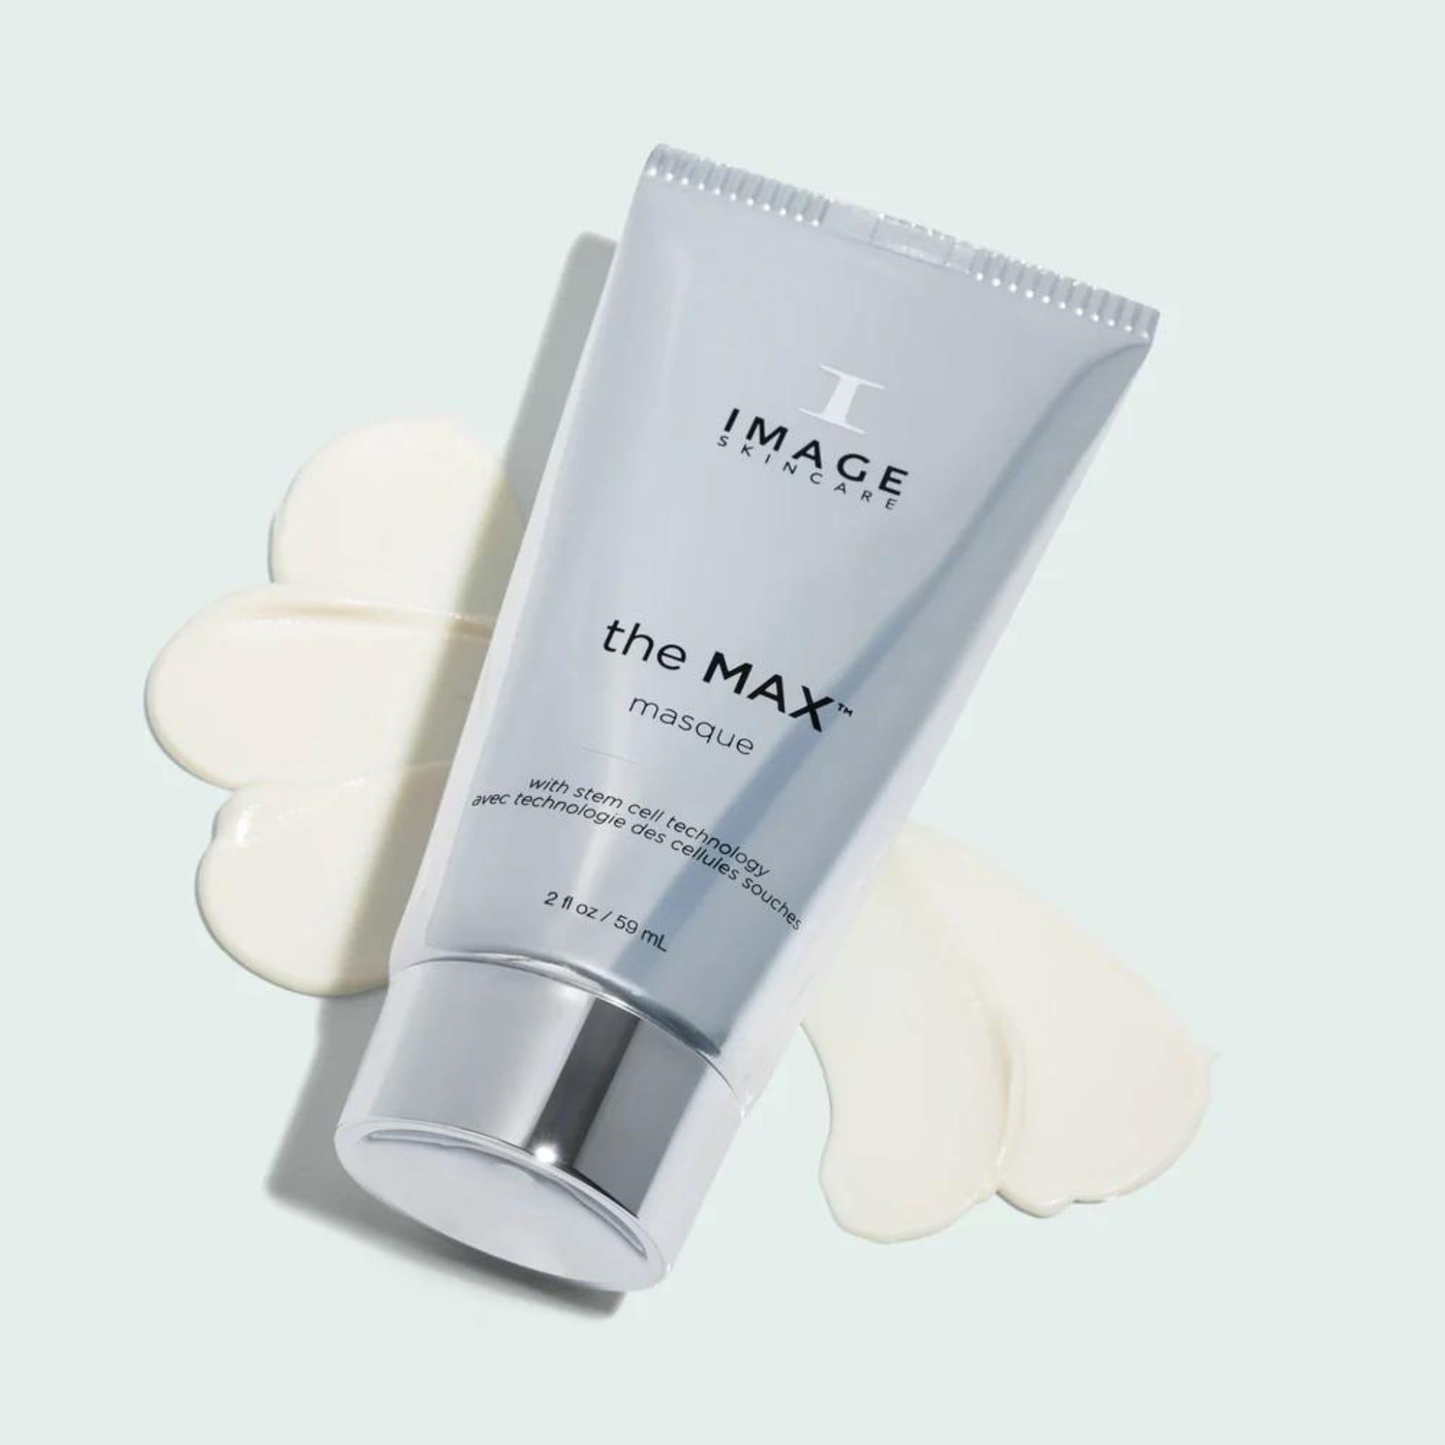 This luxurious masque helps to visibly improve the appearance of skin tightness, firmness and elasticity. With the power of wrinkle-fighting peptides and plant cell extracts, the moisture-rich formula helps to smooth and refine the skin.